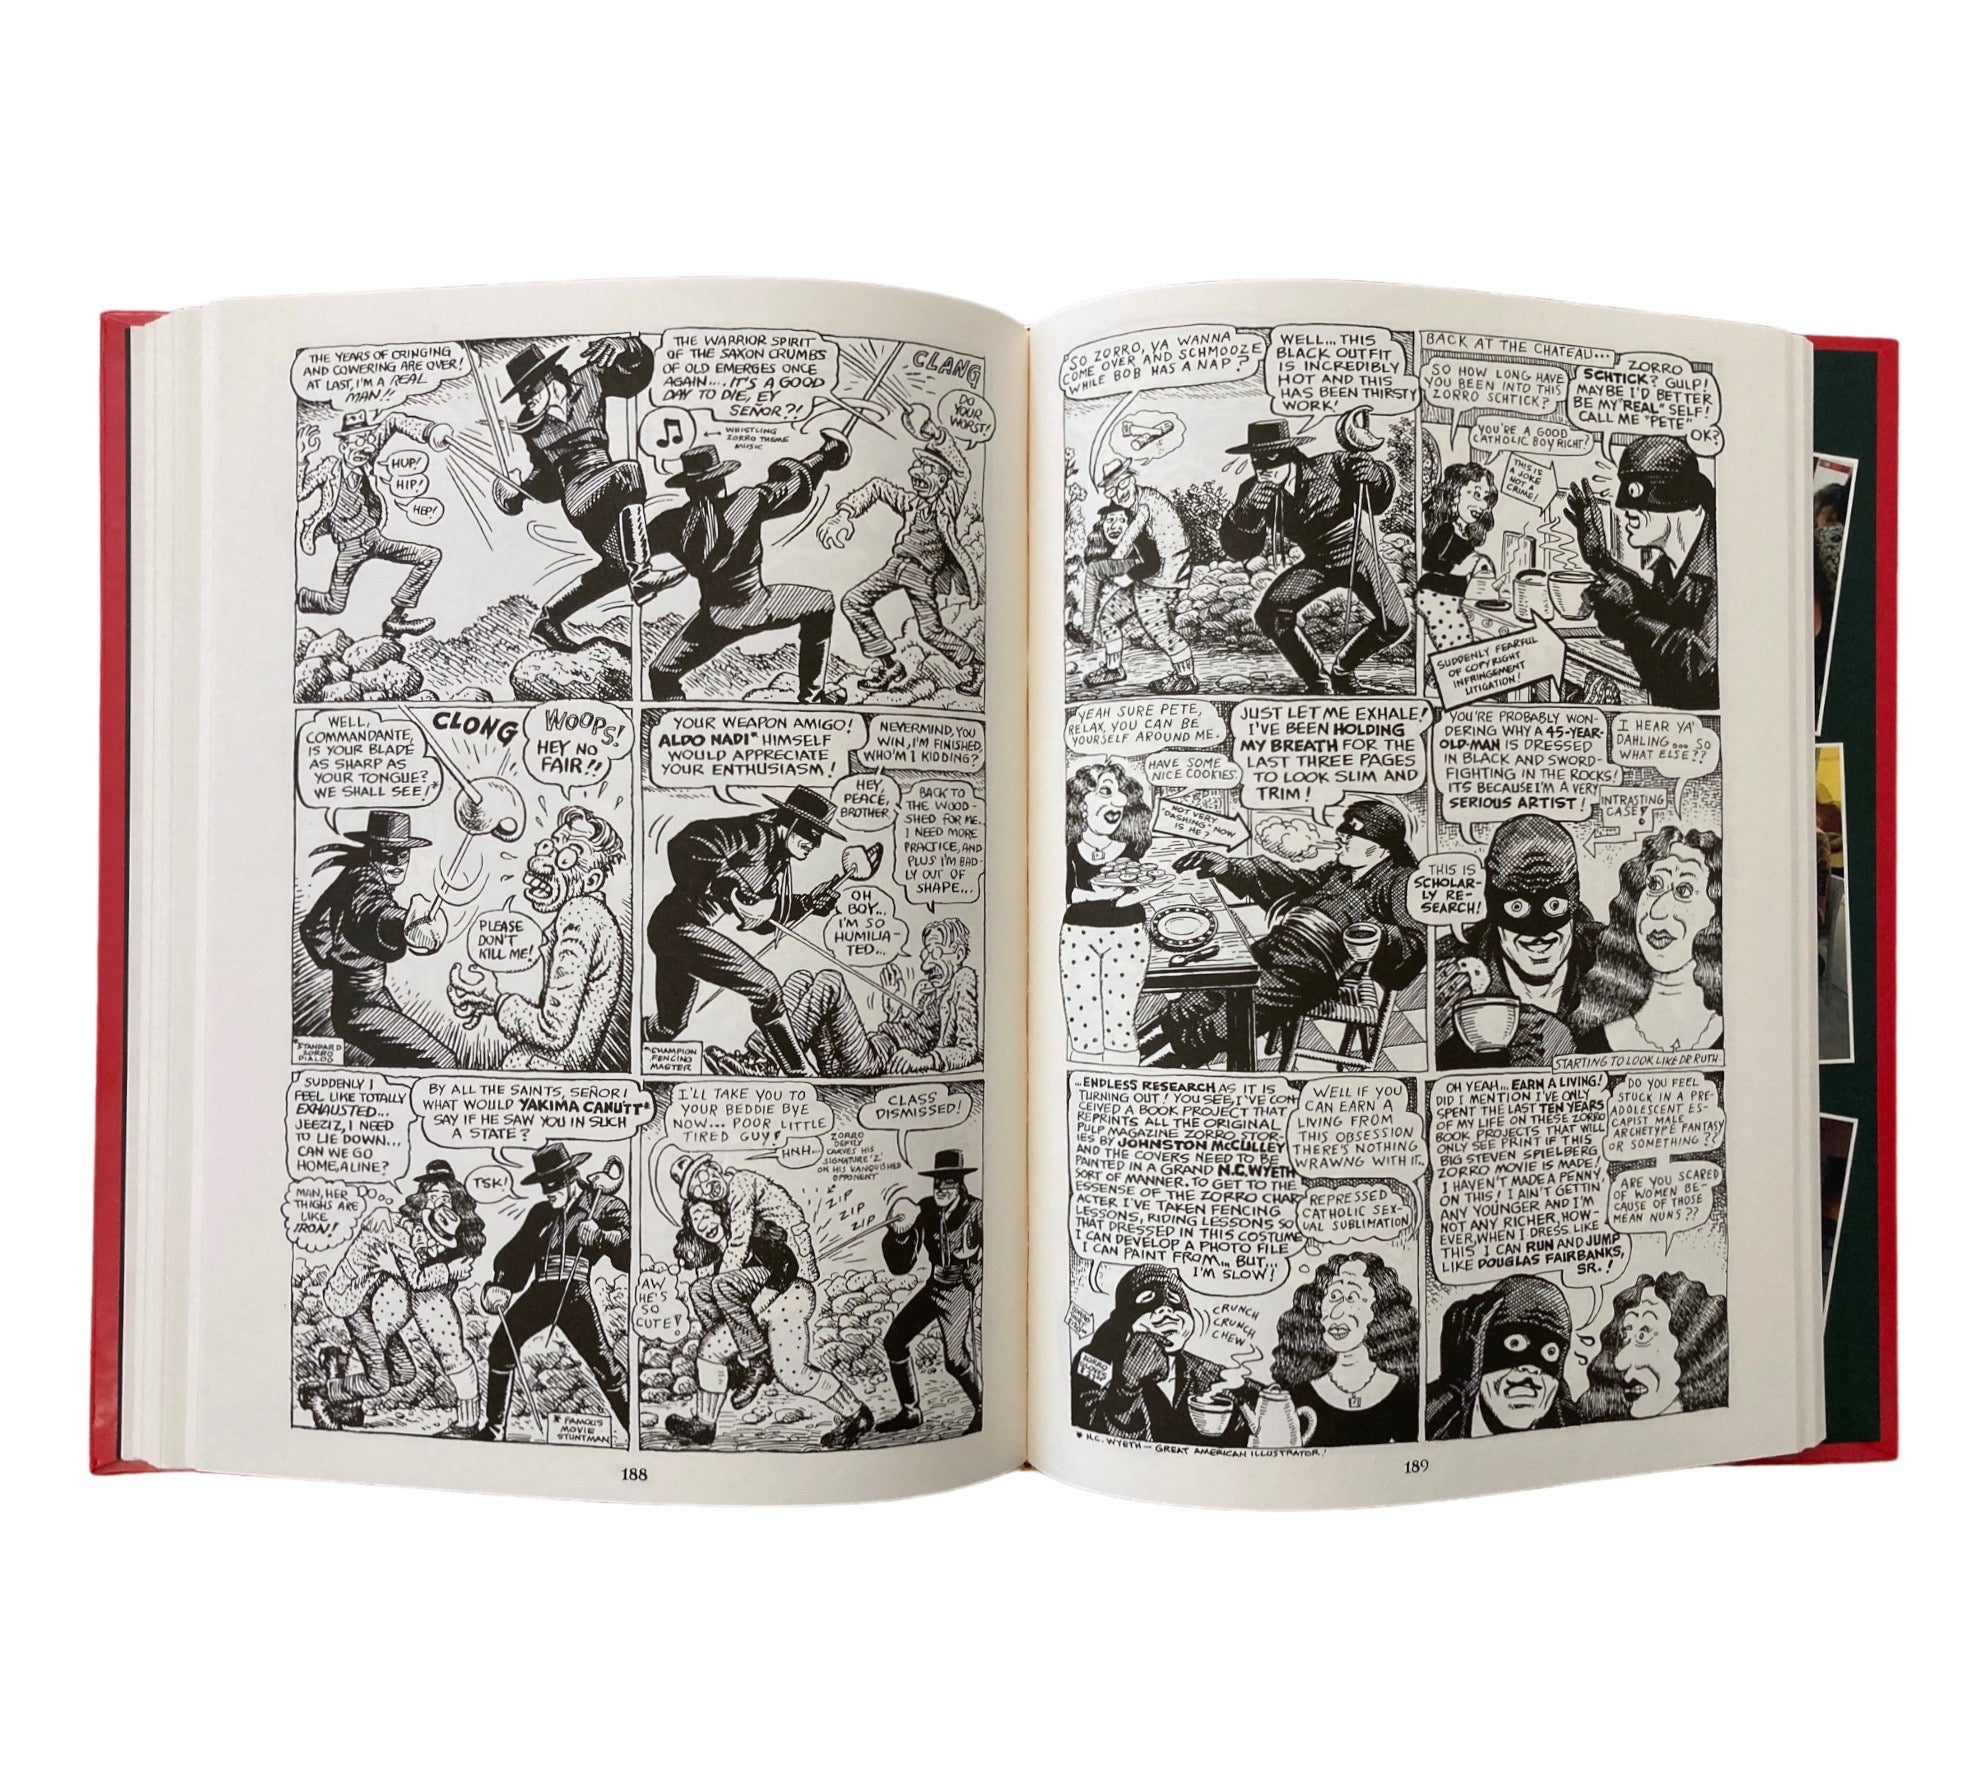 Drawn Together: The Collected Works of R. and A. Crumb